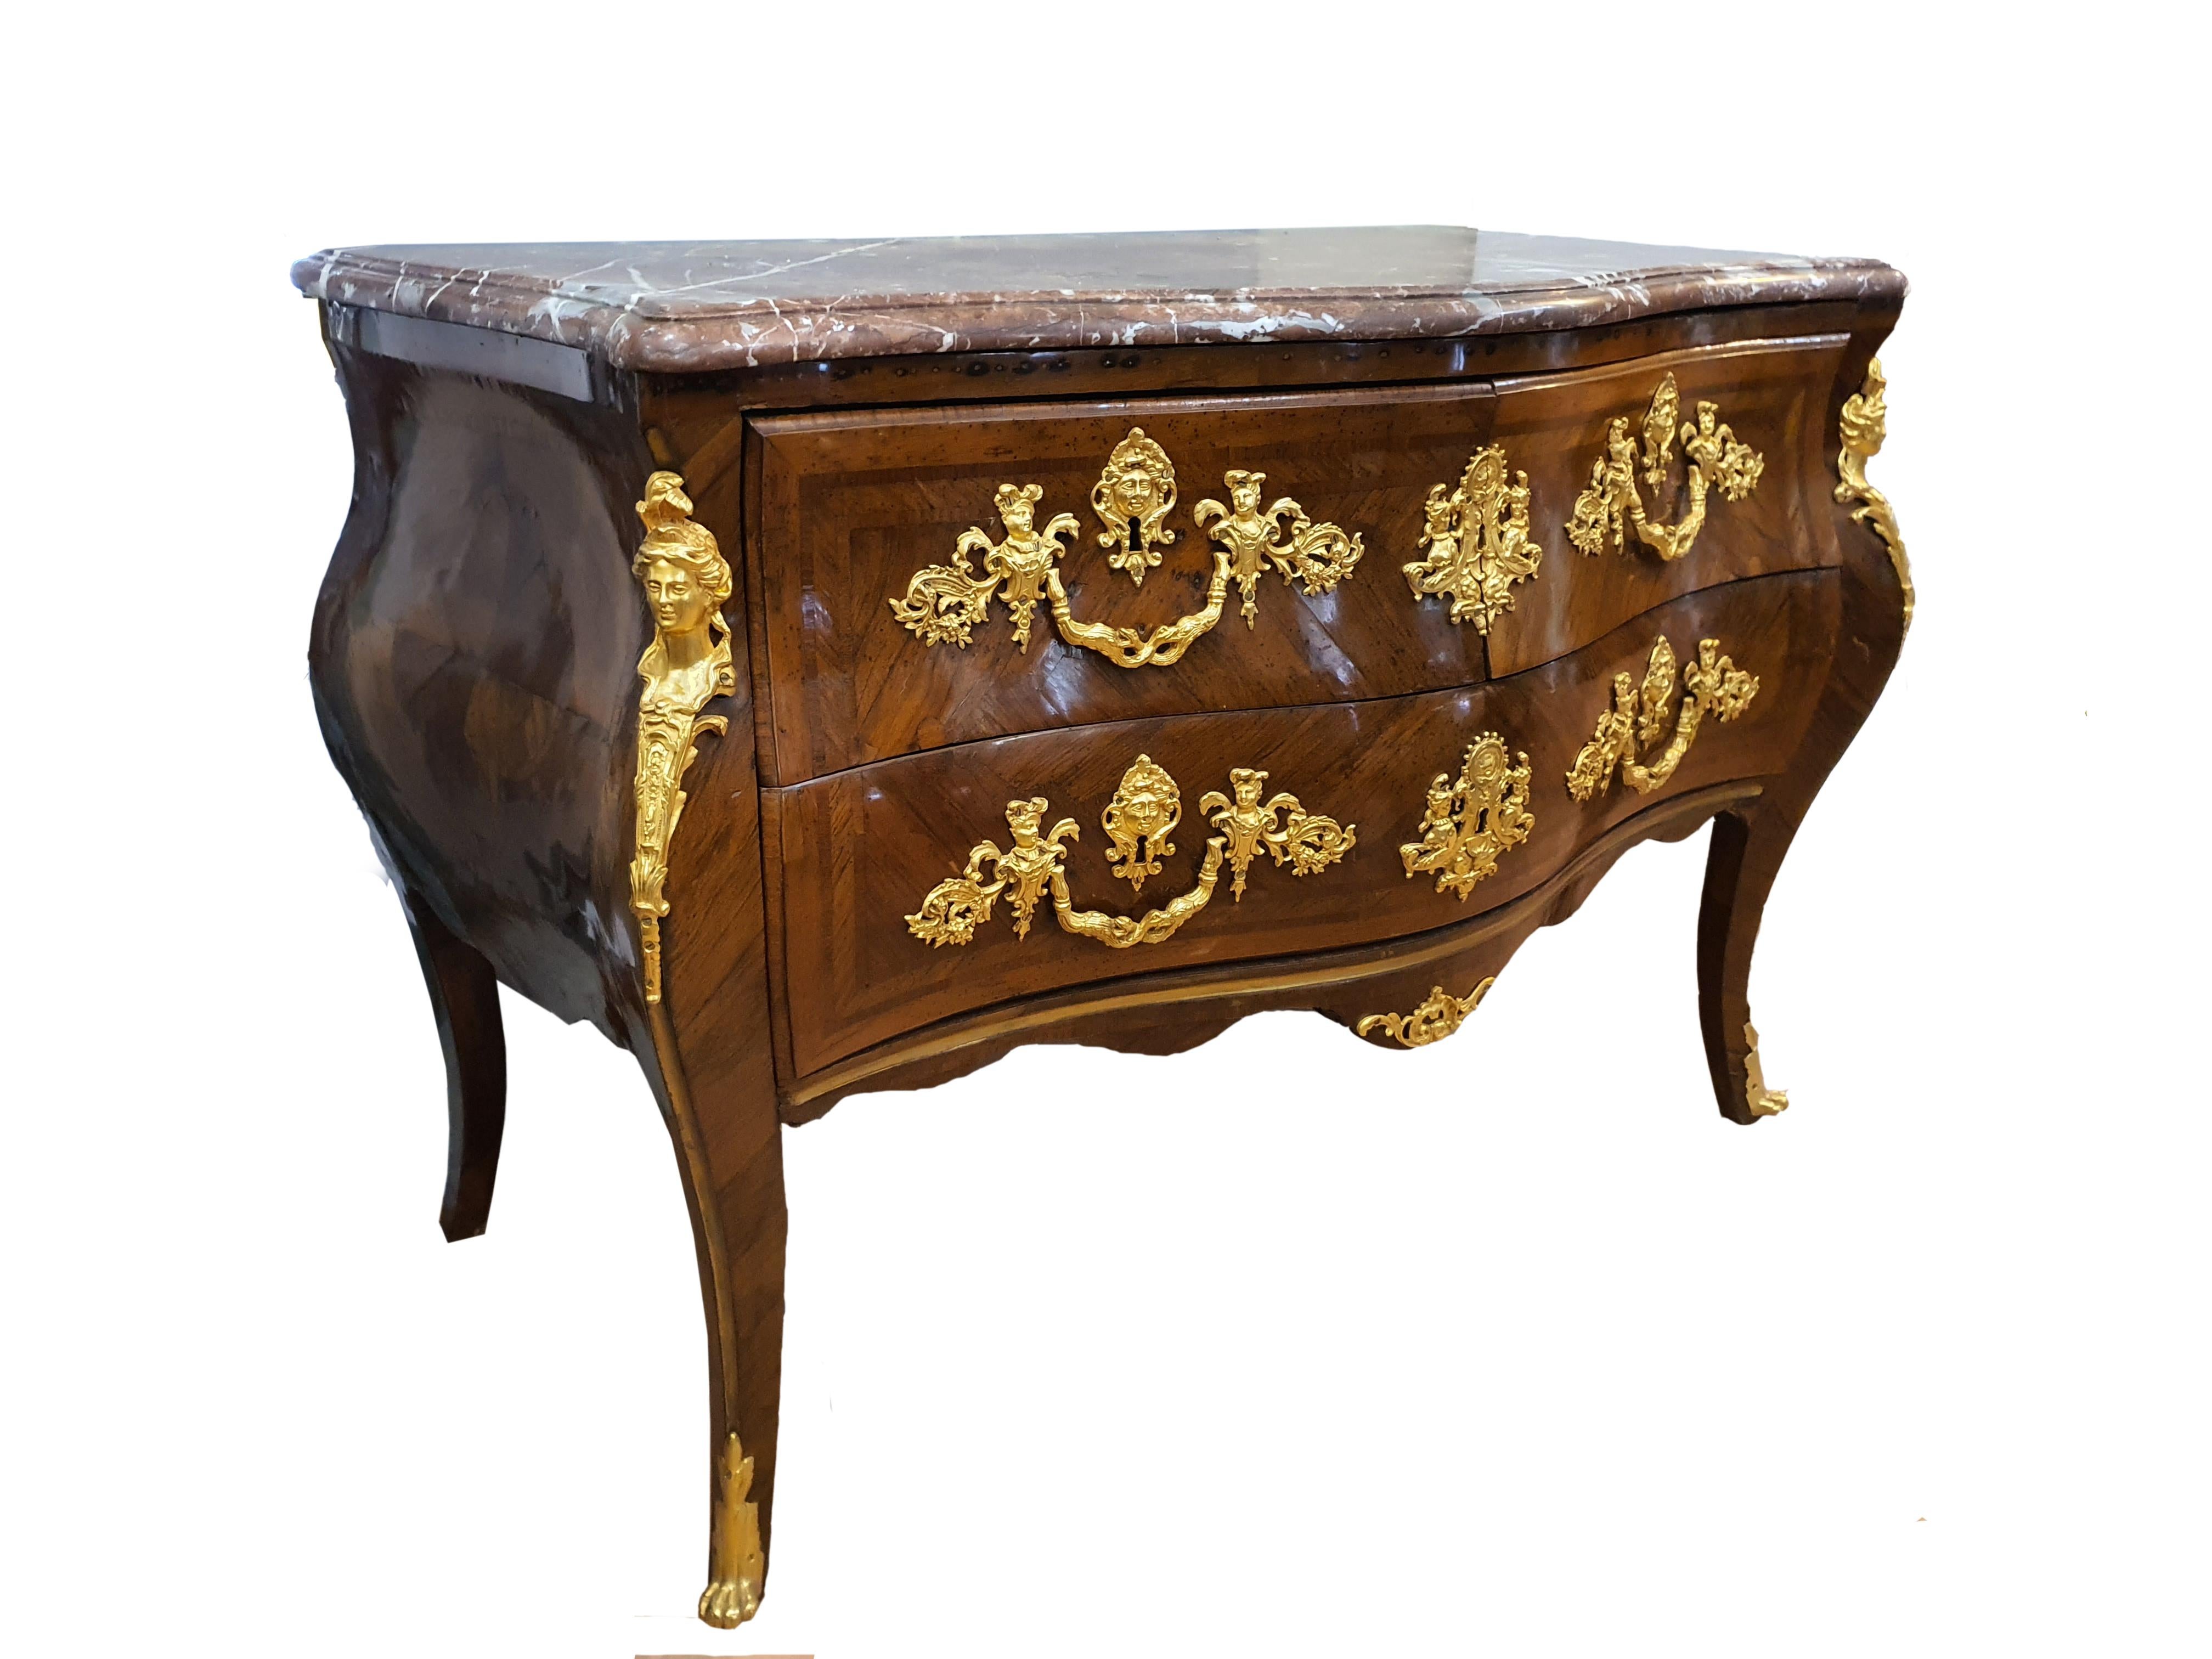 French 18th Century Louis XV Commode Chests of Drawers Gilded Bronze Frech Marble